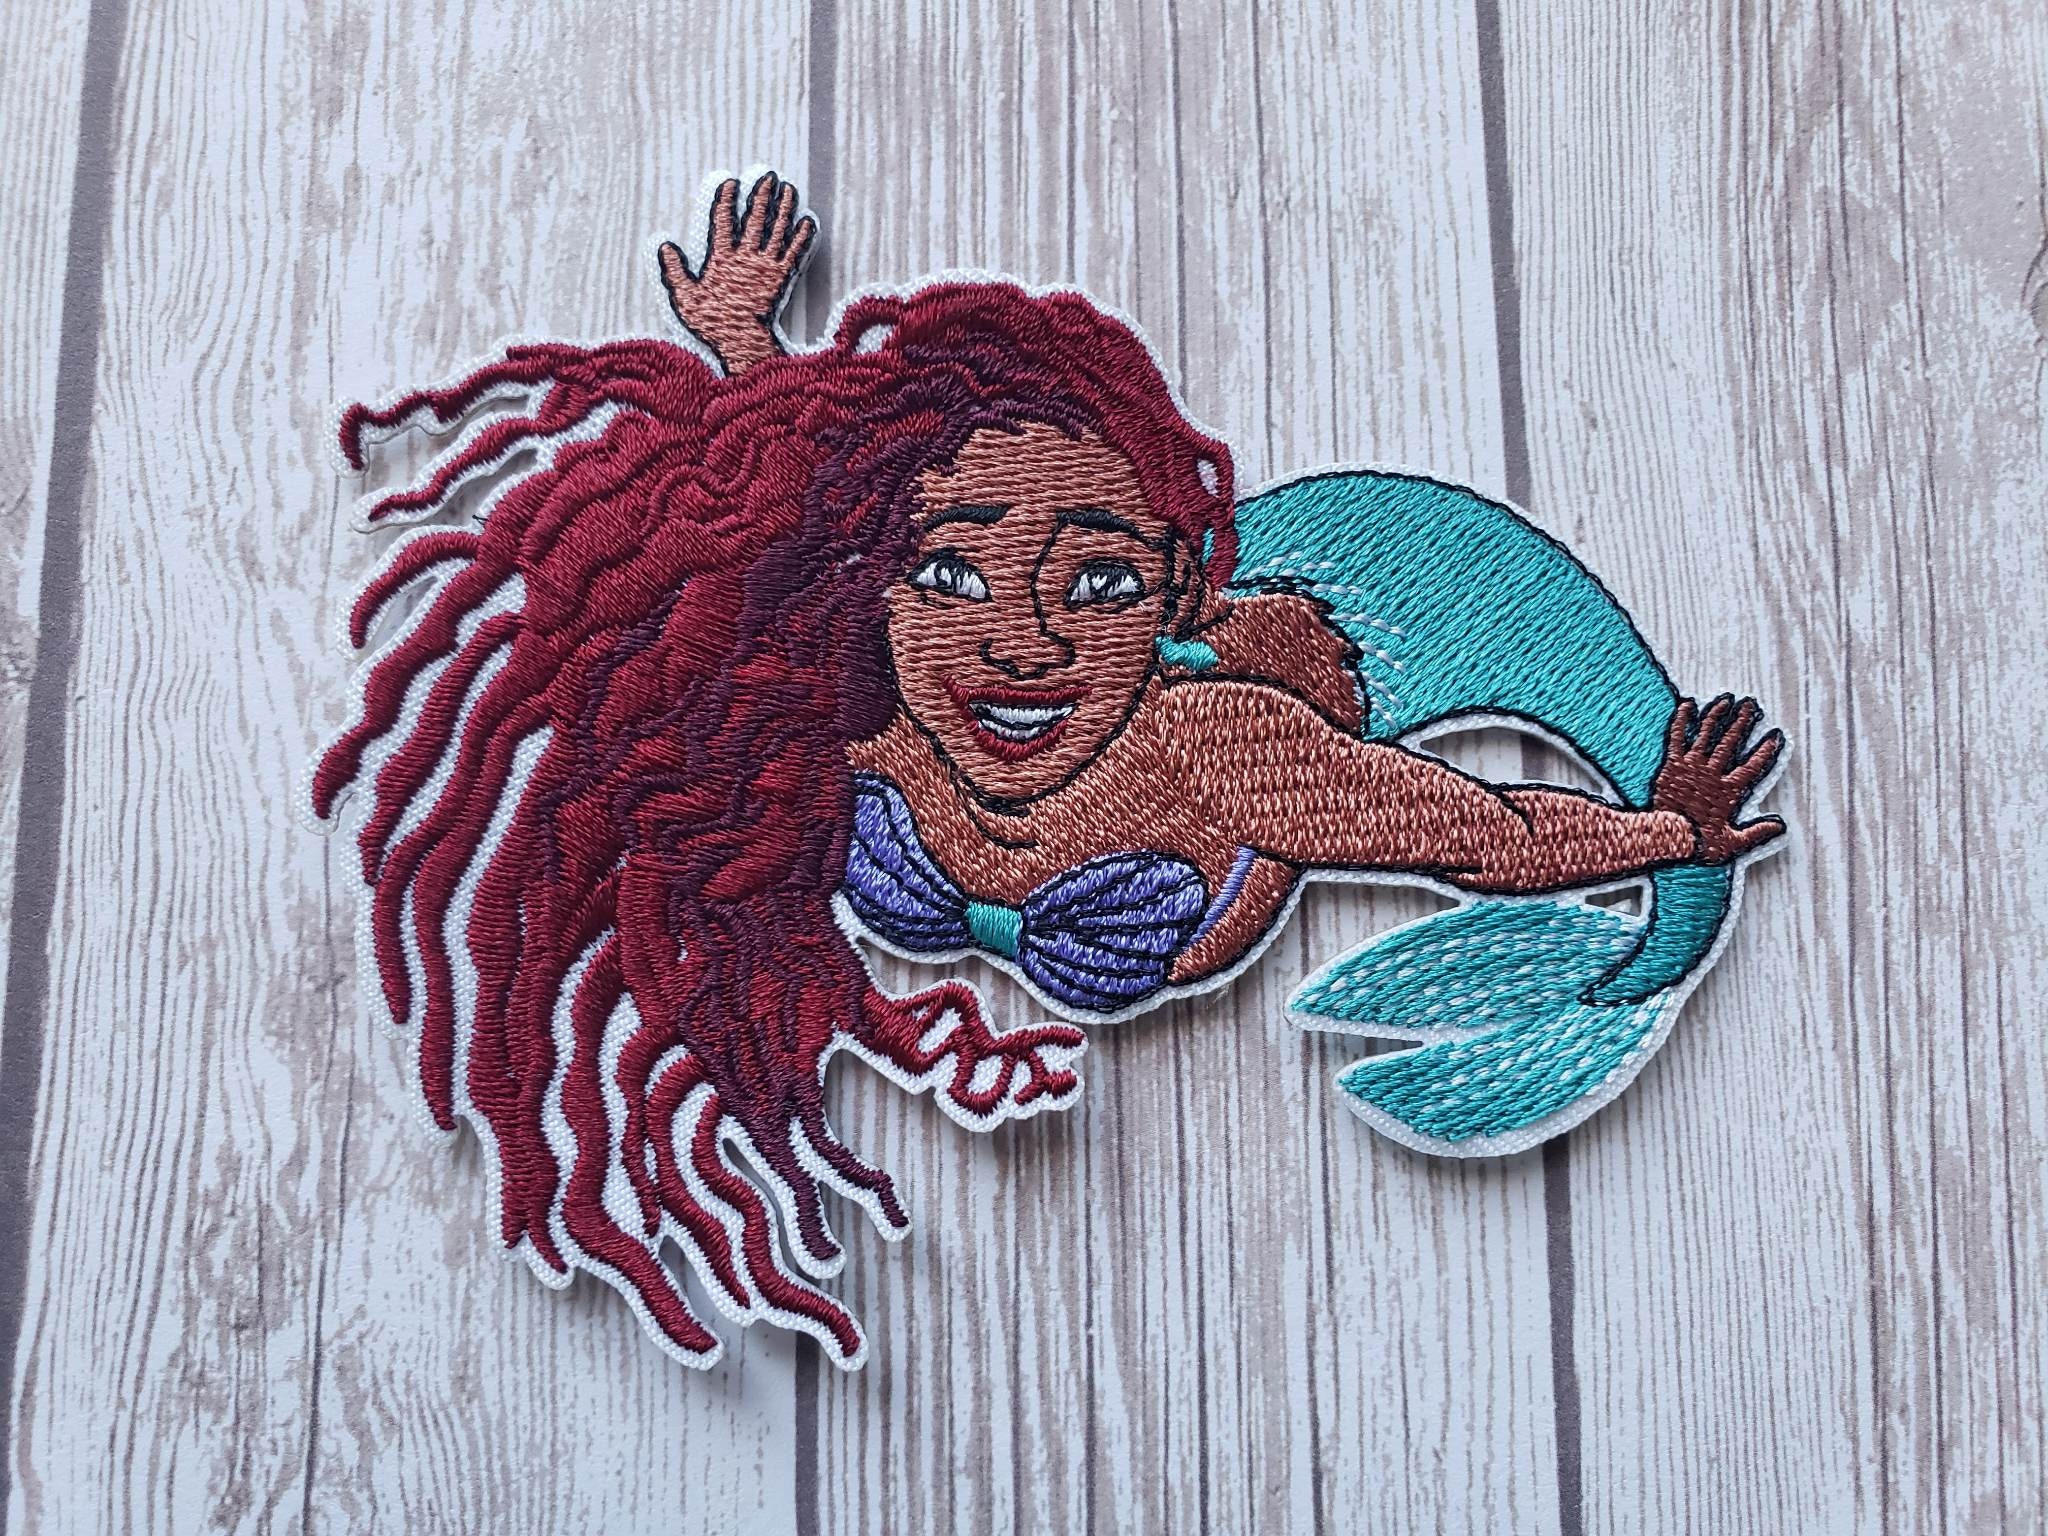 Disney Princess Ariel Embroidered Shaped Iron-On/Sew-On Patches LAST  CHANCE! - Beautiful Textiles